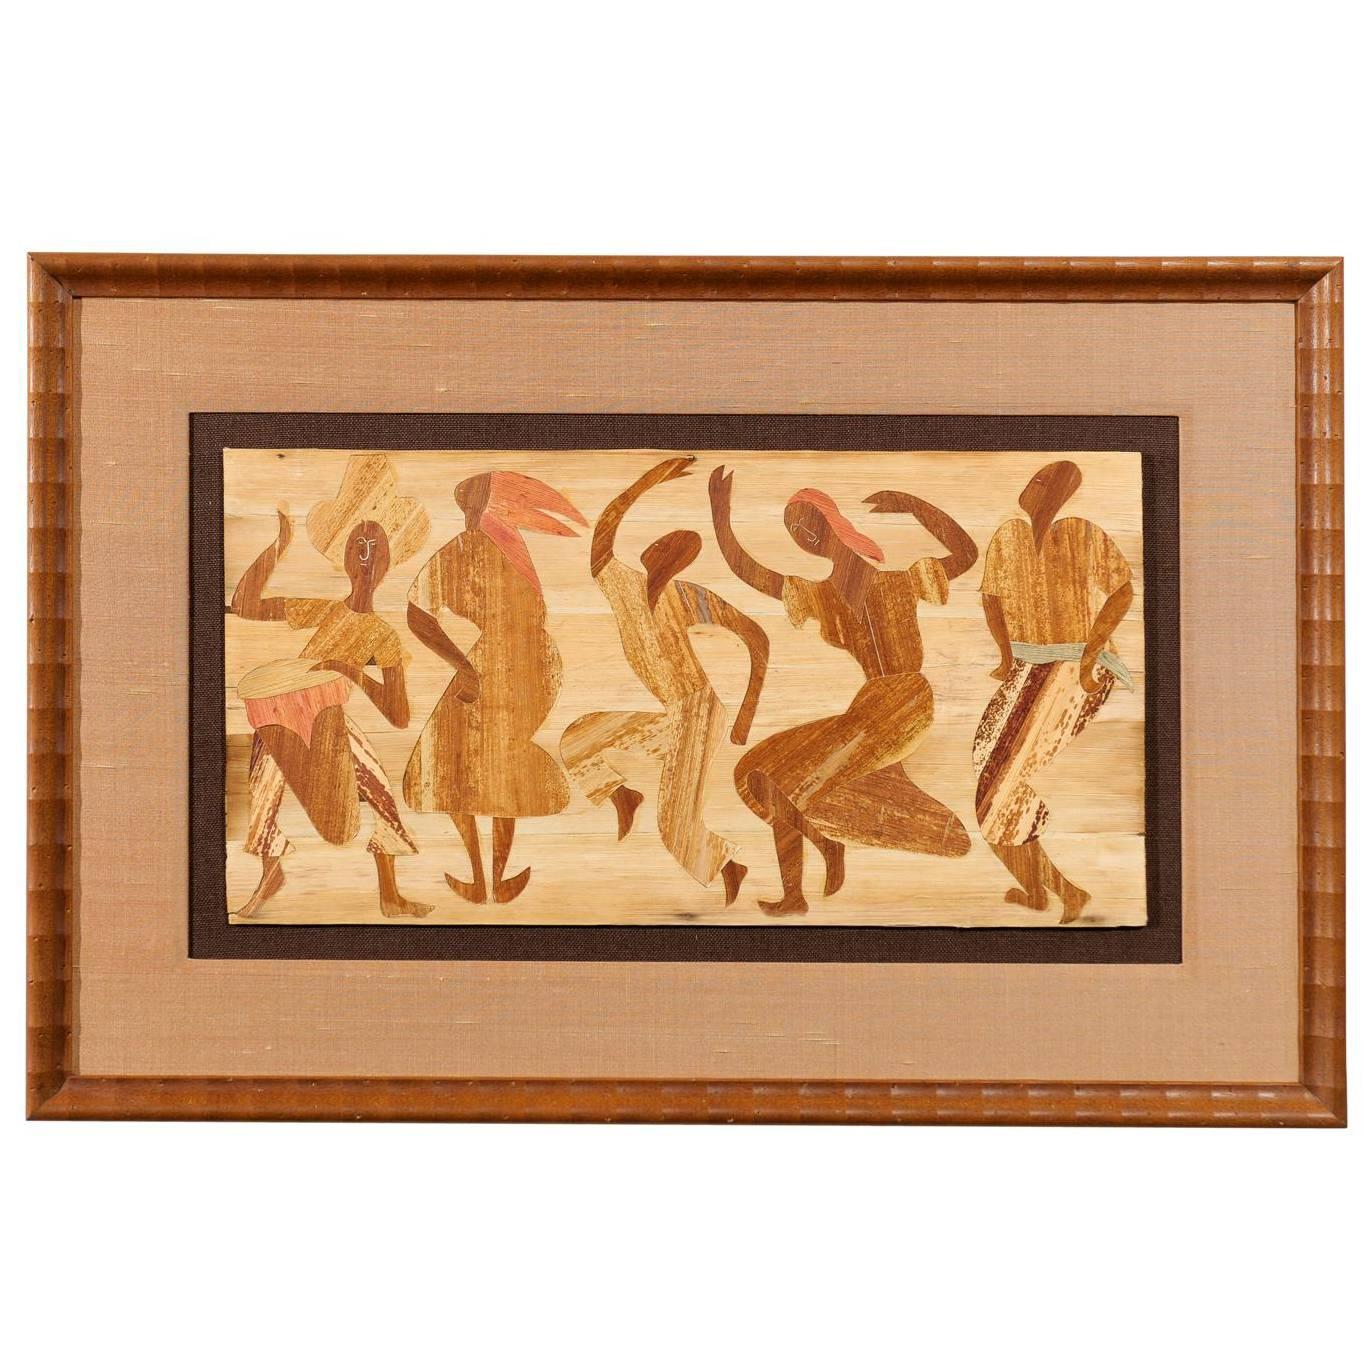 Exceptional Folk Art Dance Scene Executed in Wood Inlay For Sale